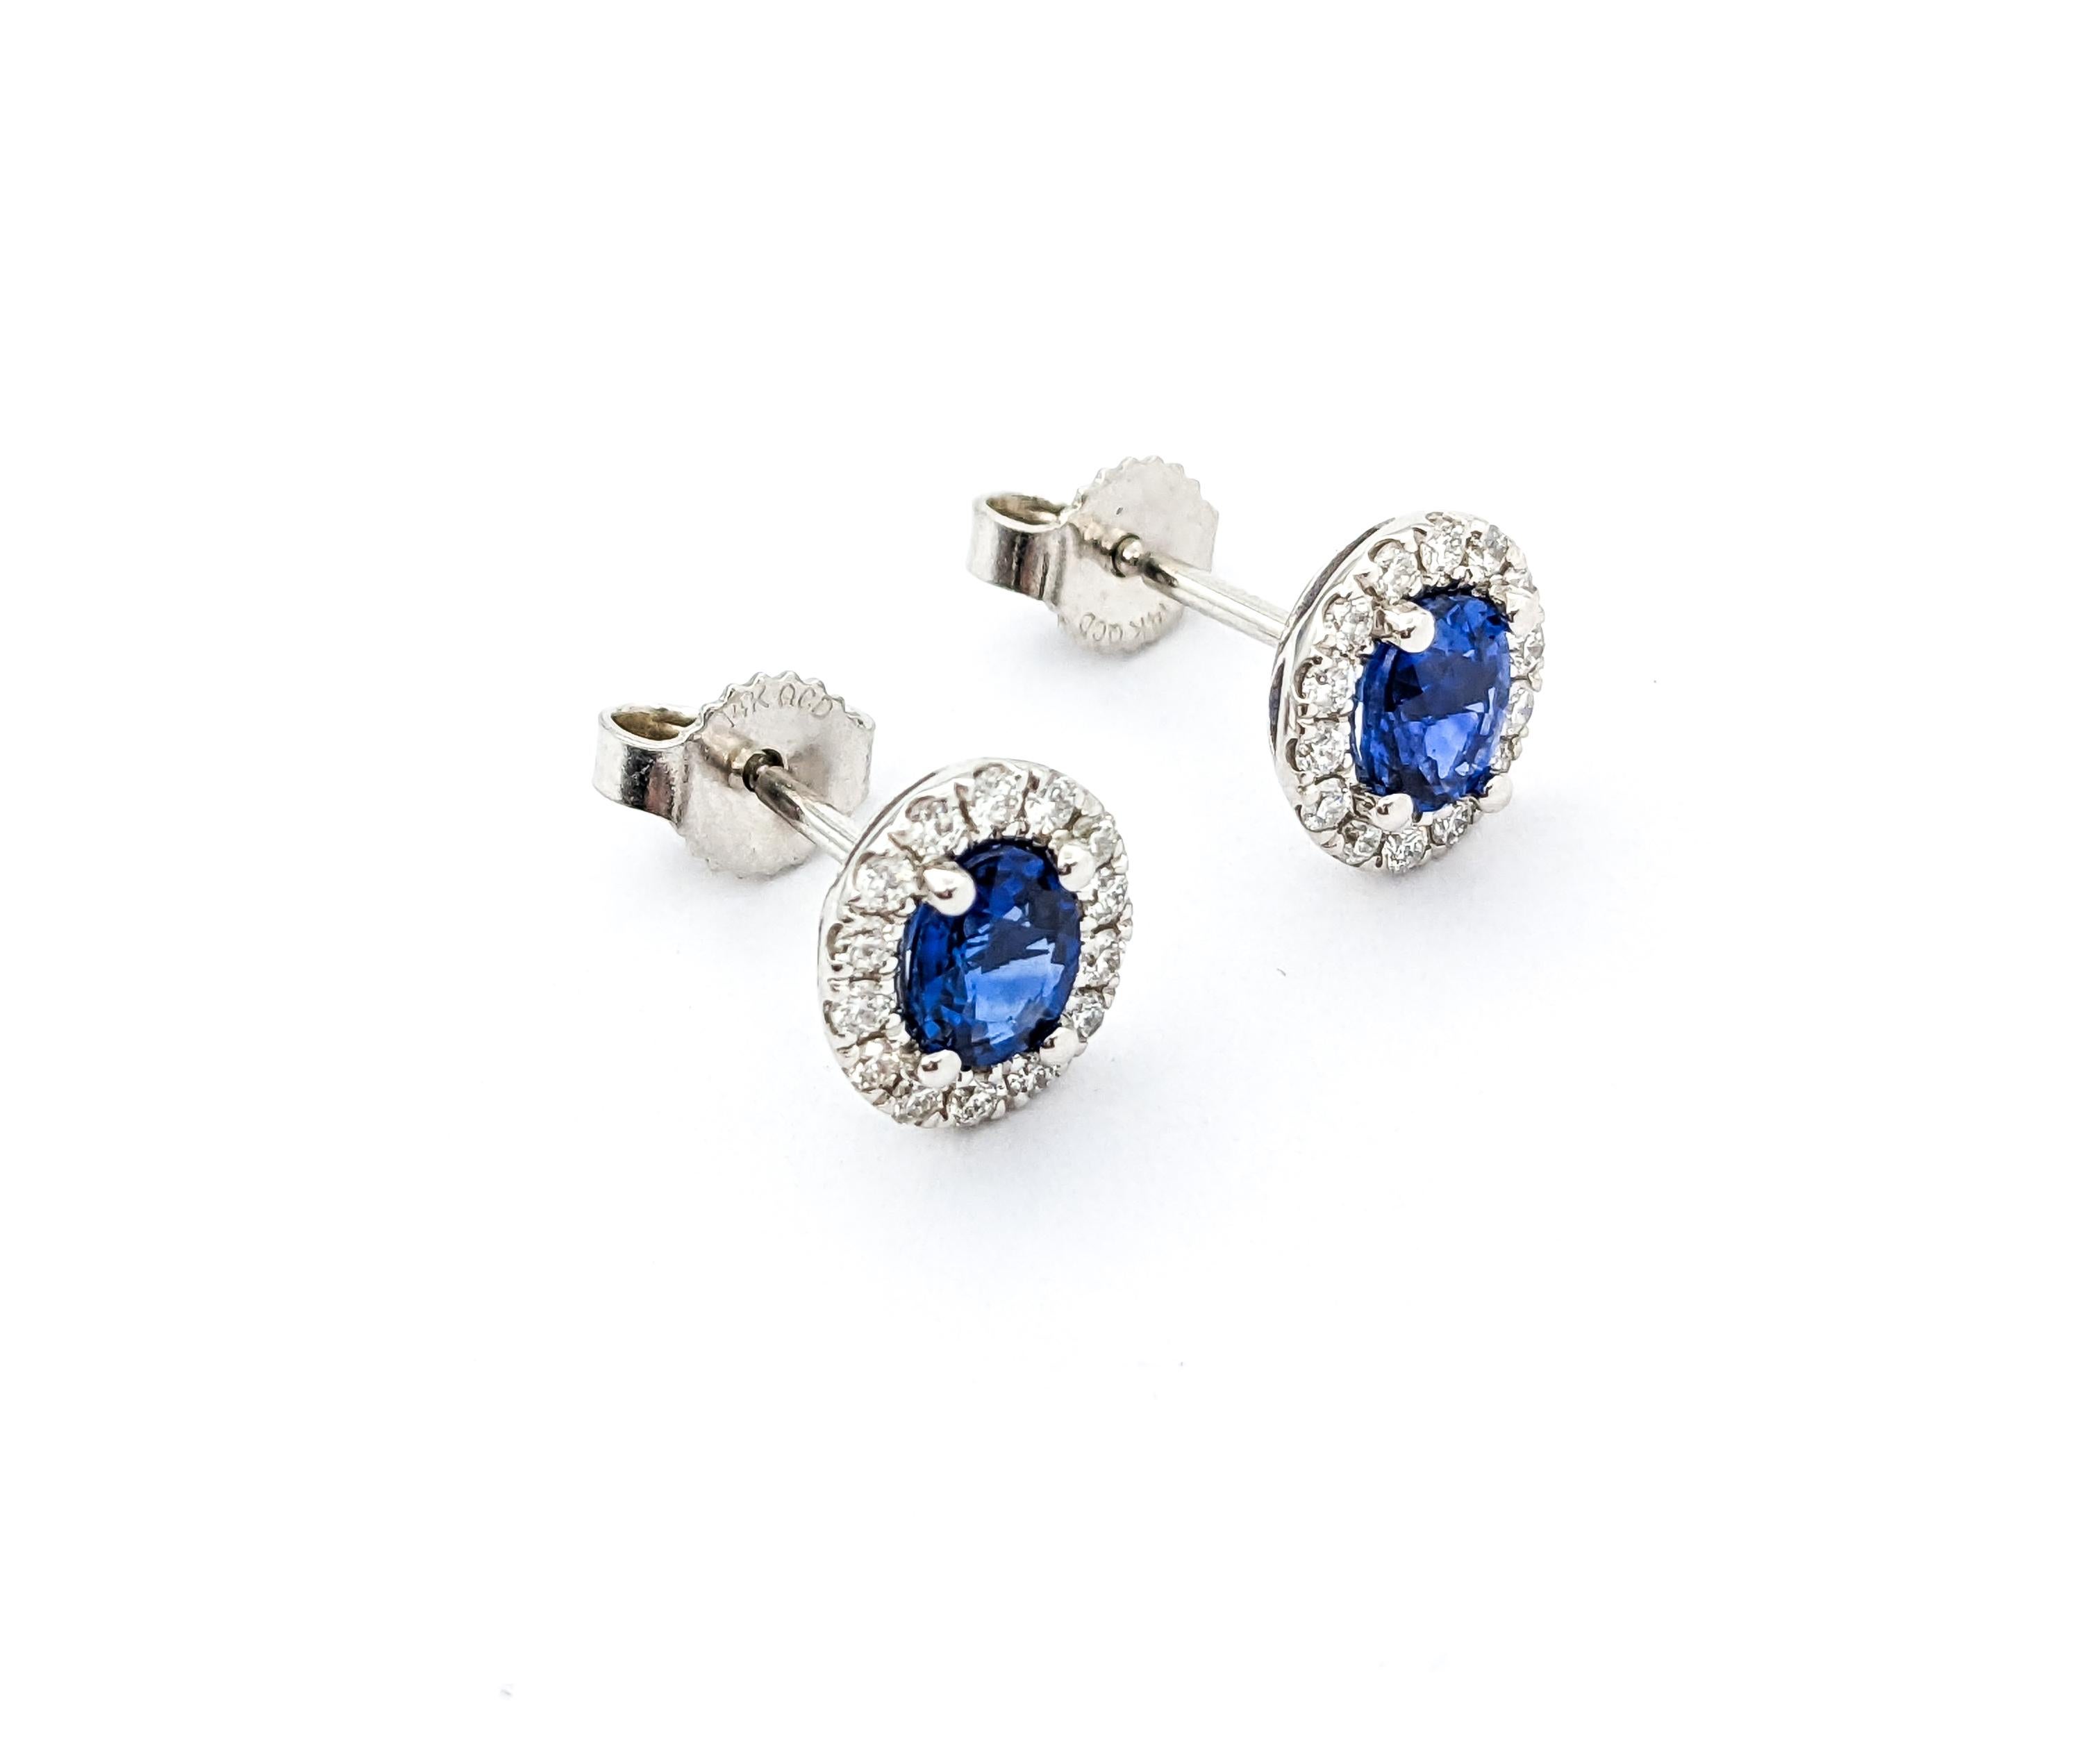 1.01ctw Blue Sapphire & Diamond Stud Earrings In white Gold

Introducing these stunning gemstone fashion earrings crafted in 14k white gold, featuring .24ctw of diamonds and 1.01ctw of sapphires in a stud design. The diamonds boast SI clarity and a